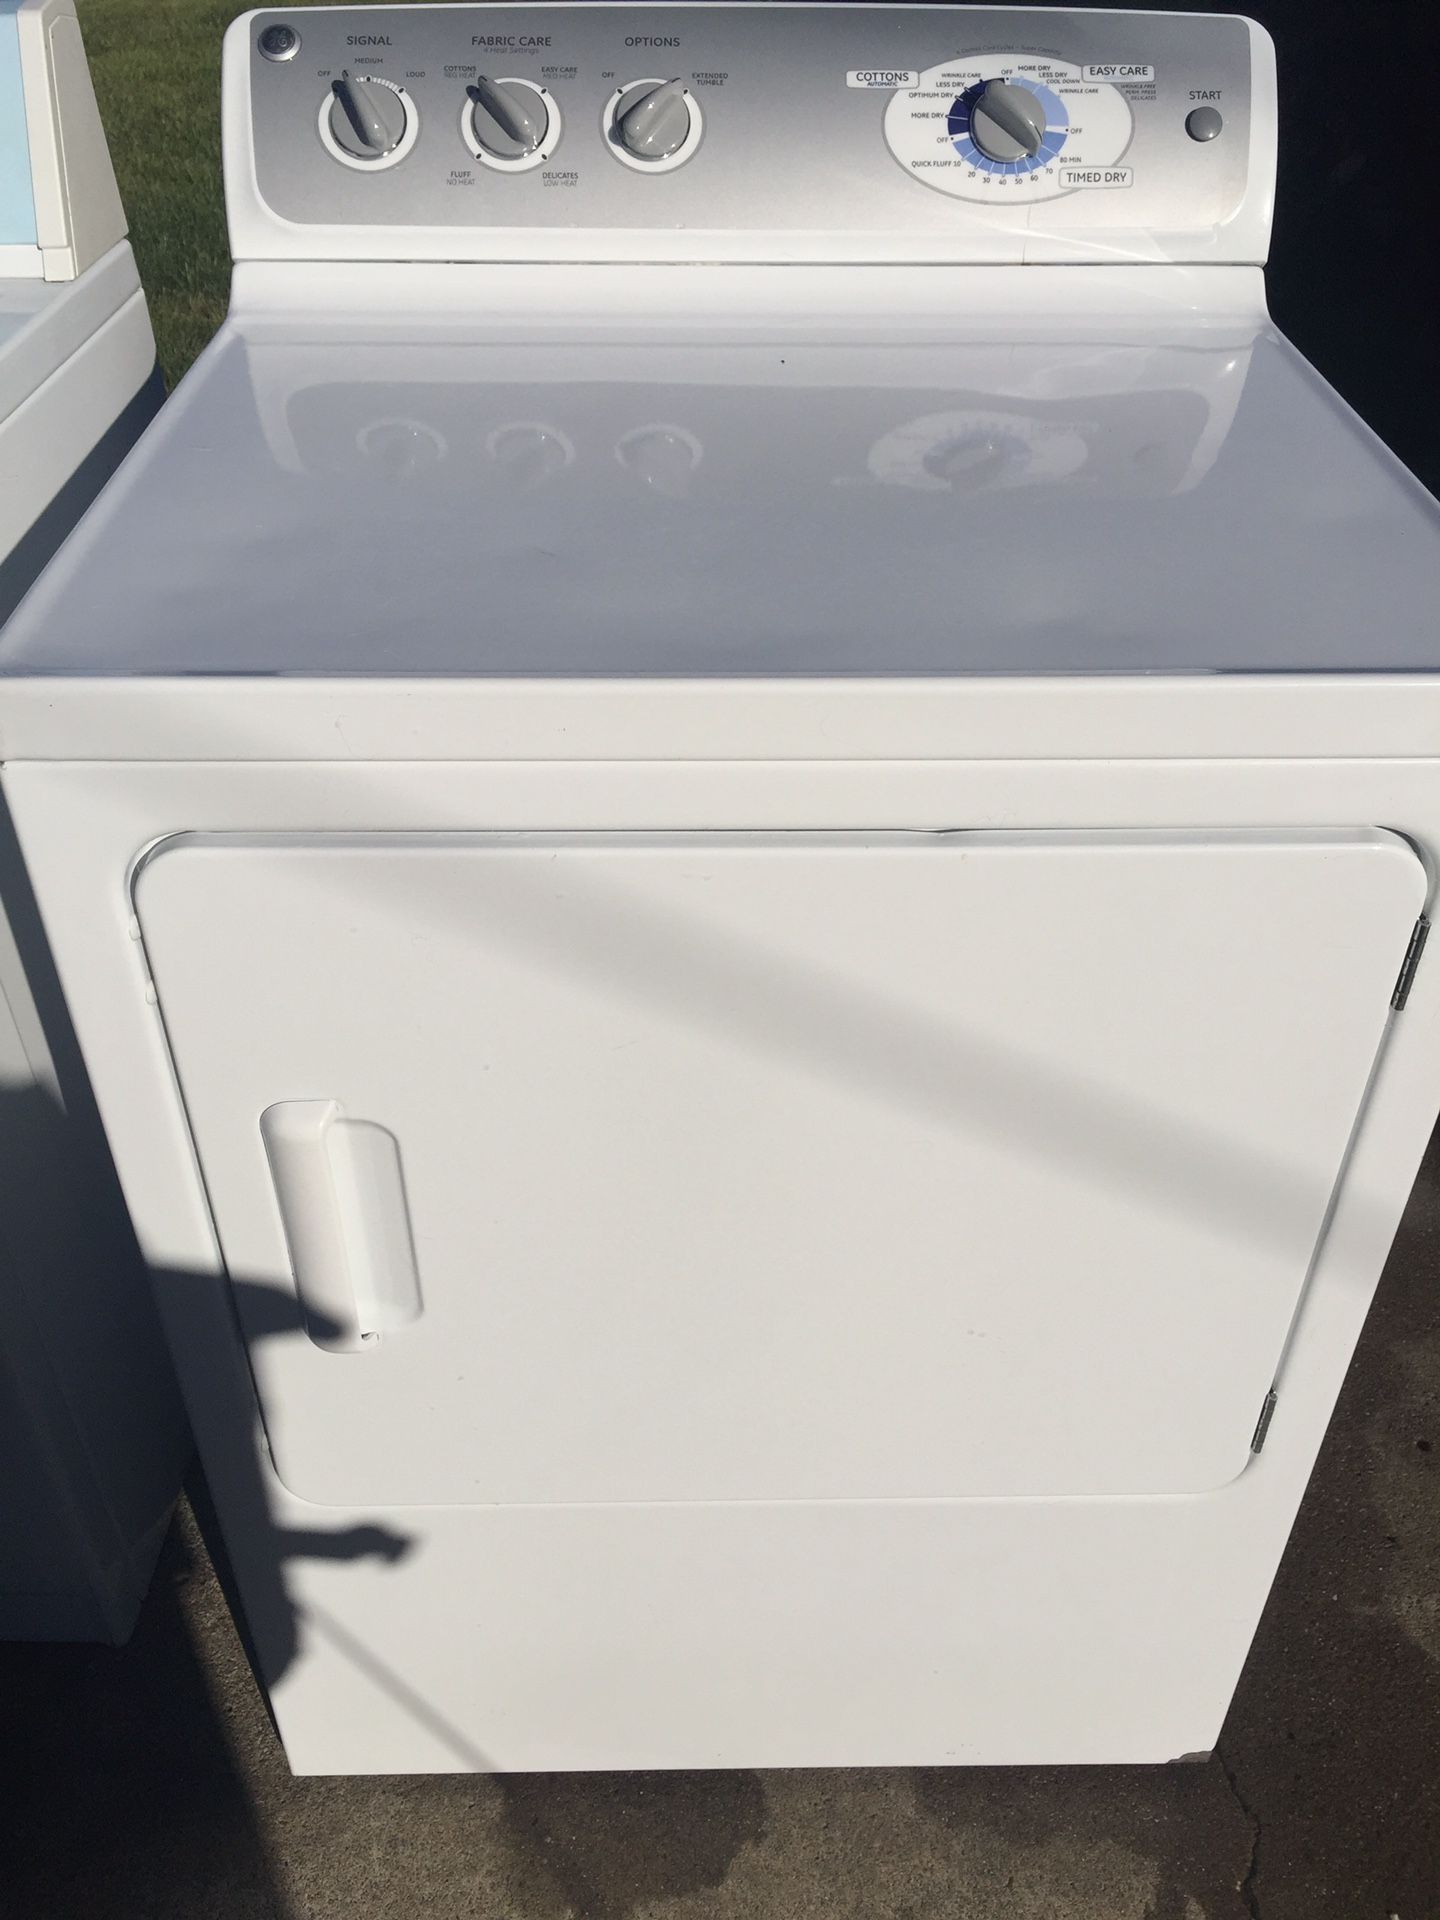 General Electric - Electric dryer excellent condition smooth running